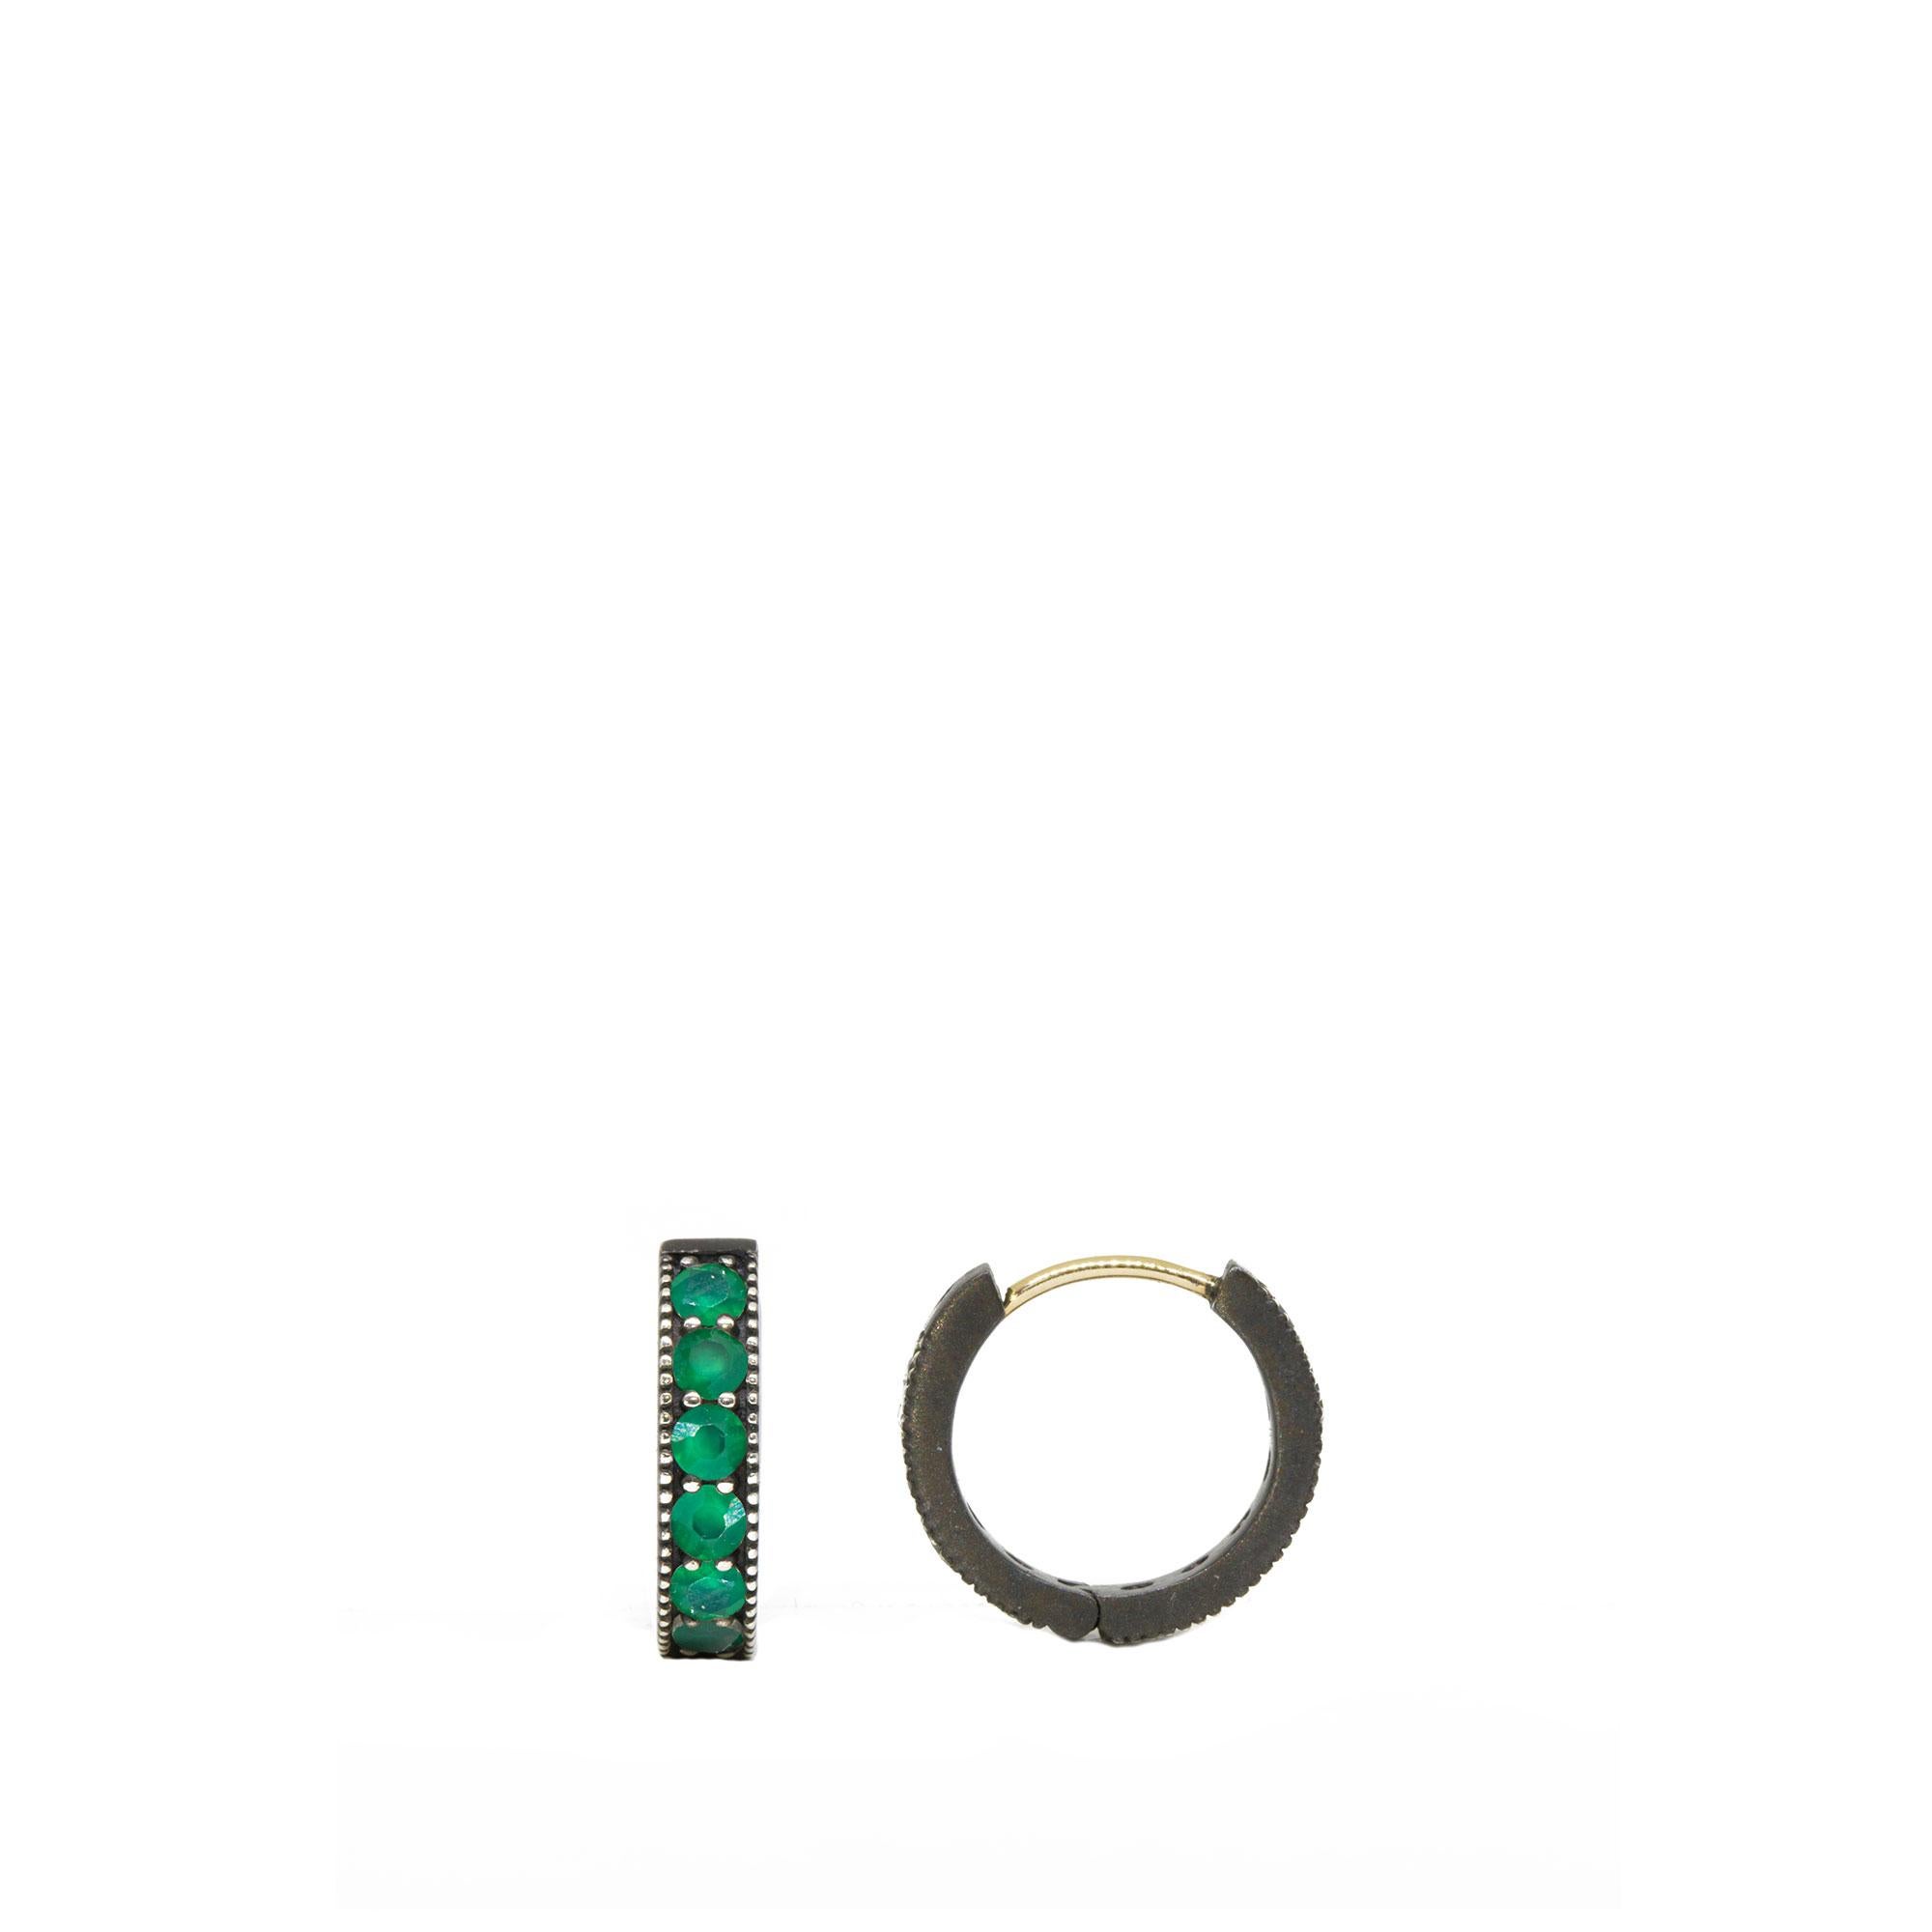 Green Onyx for day, carnelians for a night out: We designed a version of popular petite hoop that’s completely reversible. Each style comes with two types of gemstones—one set faces out, and you just flip the hoop around for a completely different